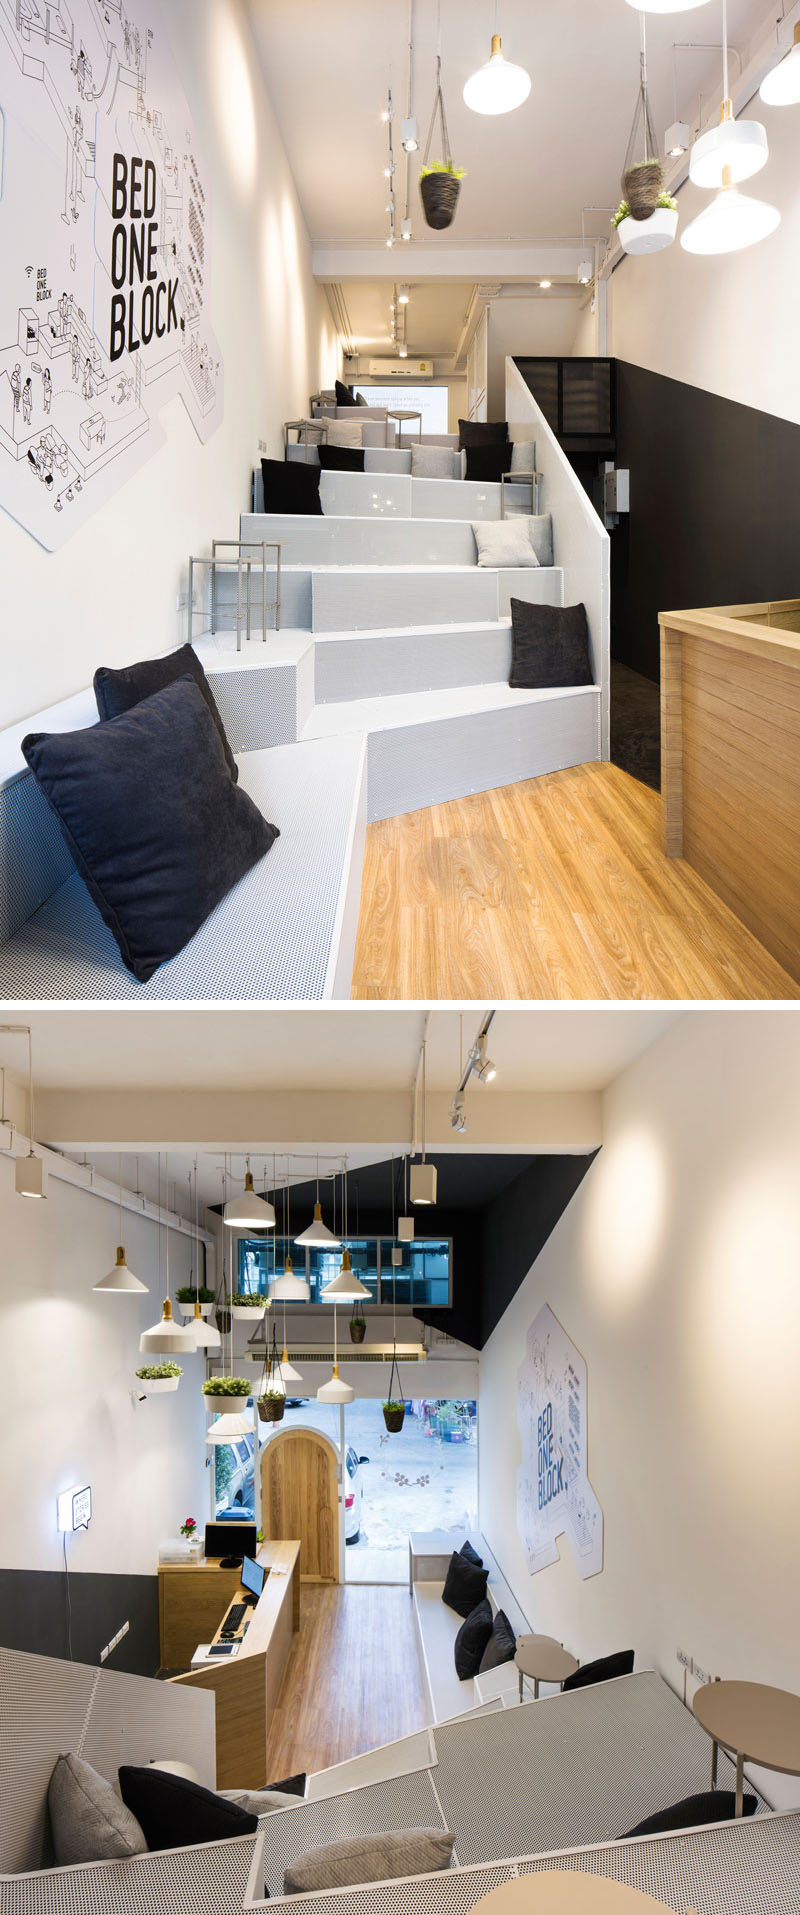 Inside is modern hostel in Bangkok, the reception desk is on the right, while bright white steps create a common area for people to meet up, work or relax.